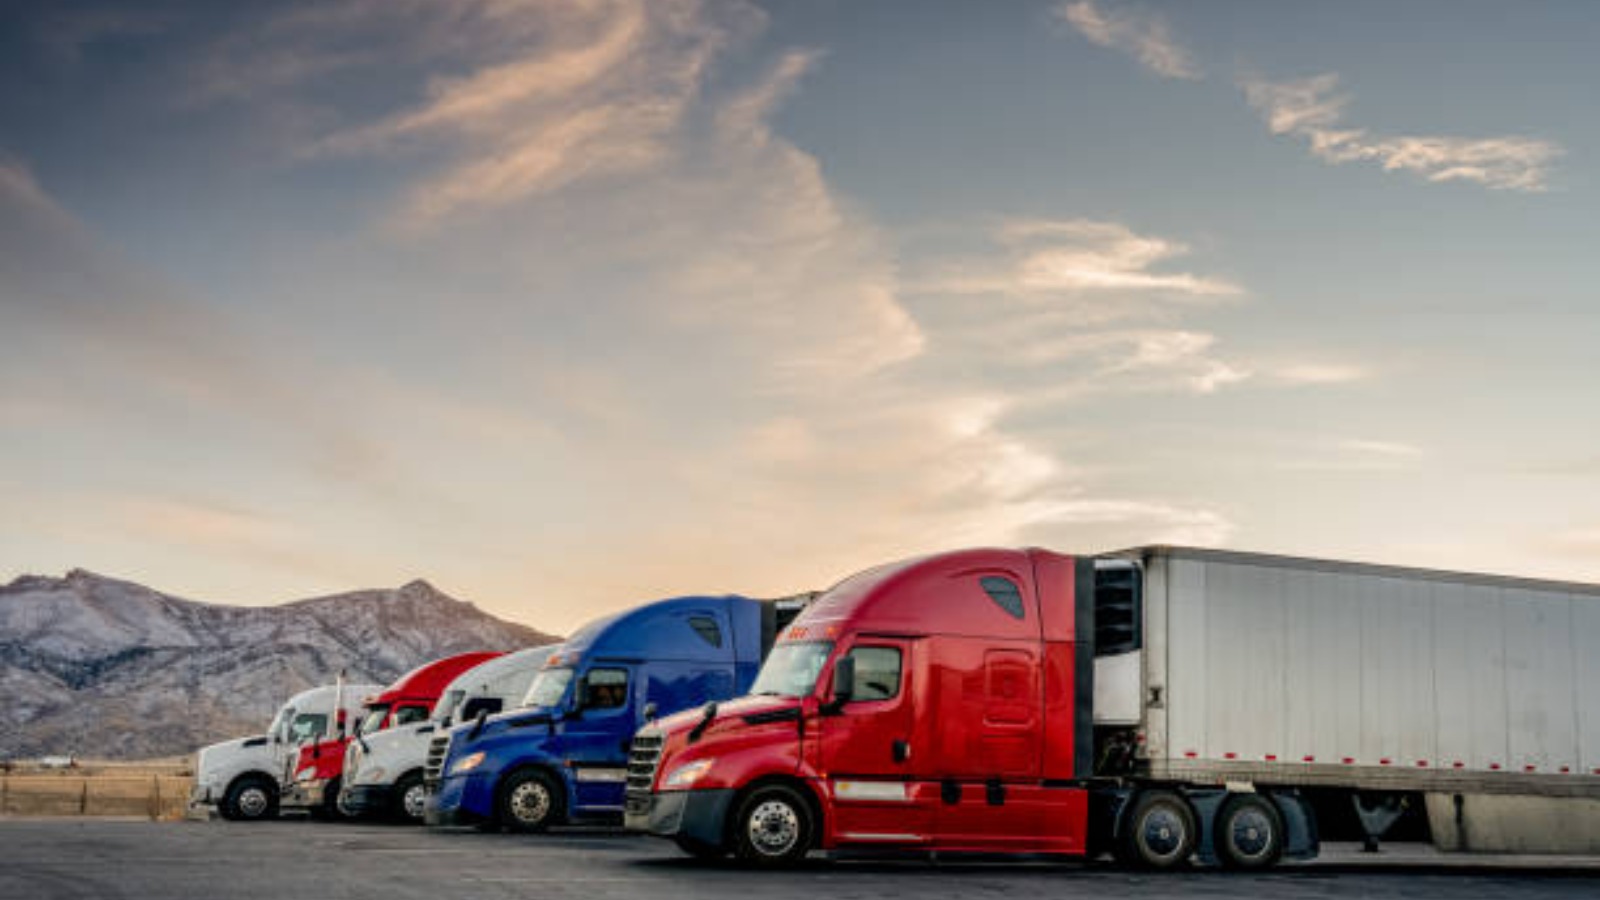 The Complete Guide to Truck Parts and Equipment: Everything You Need to Know